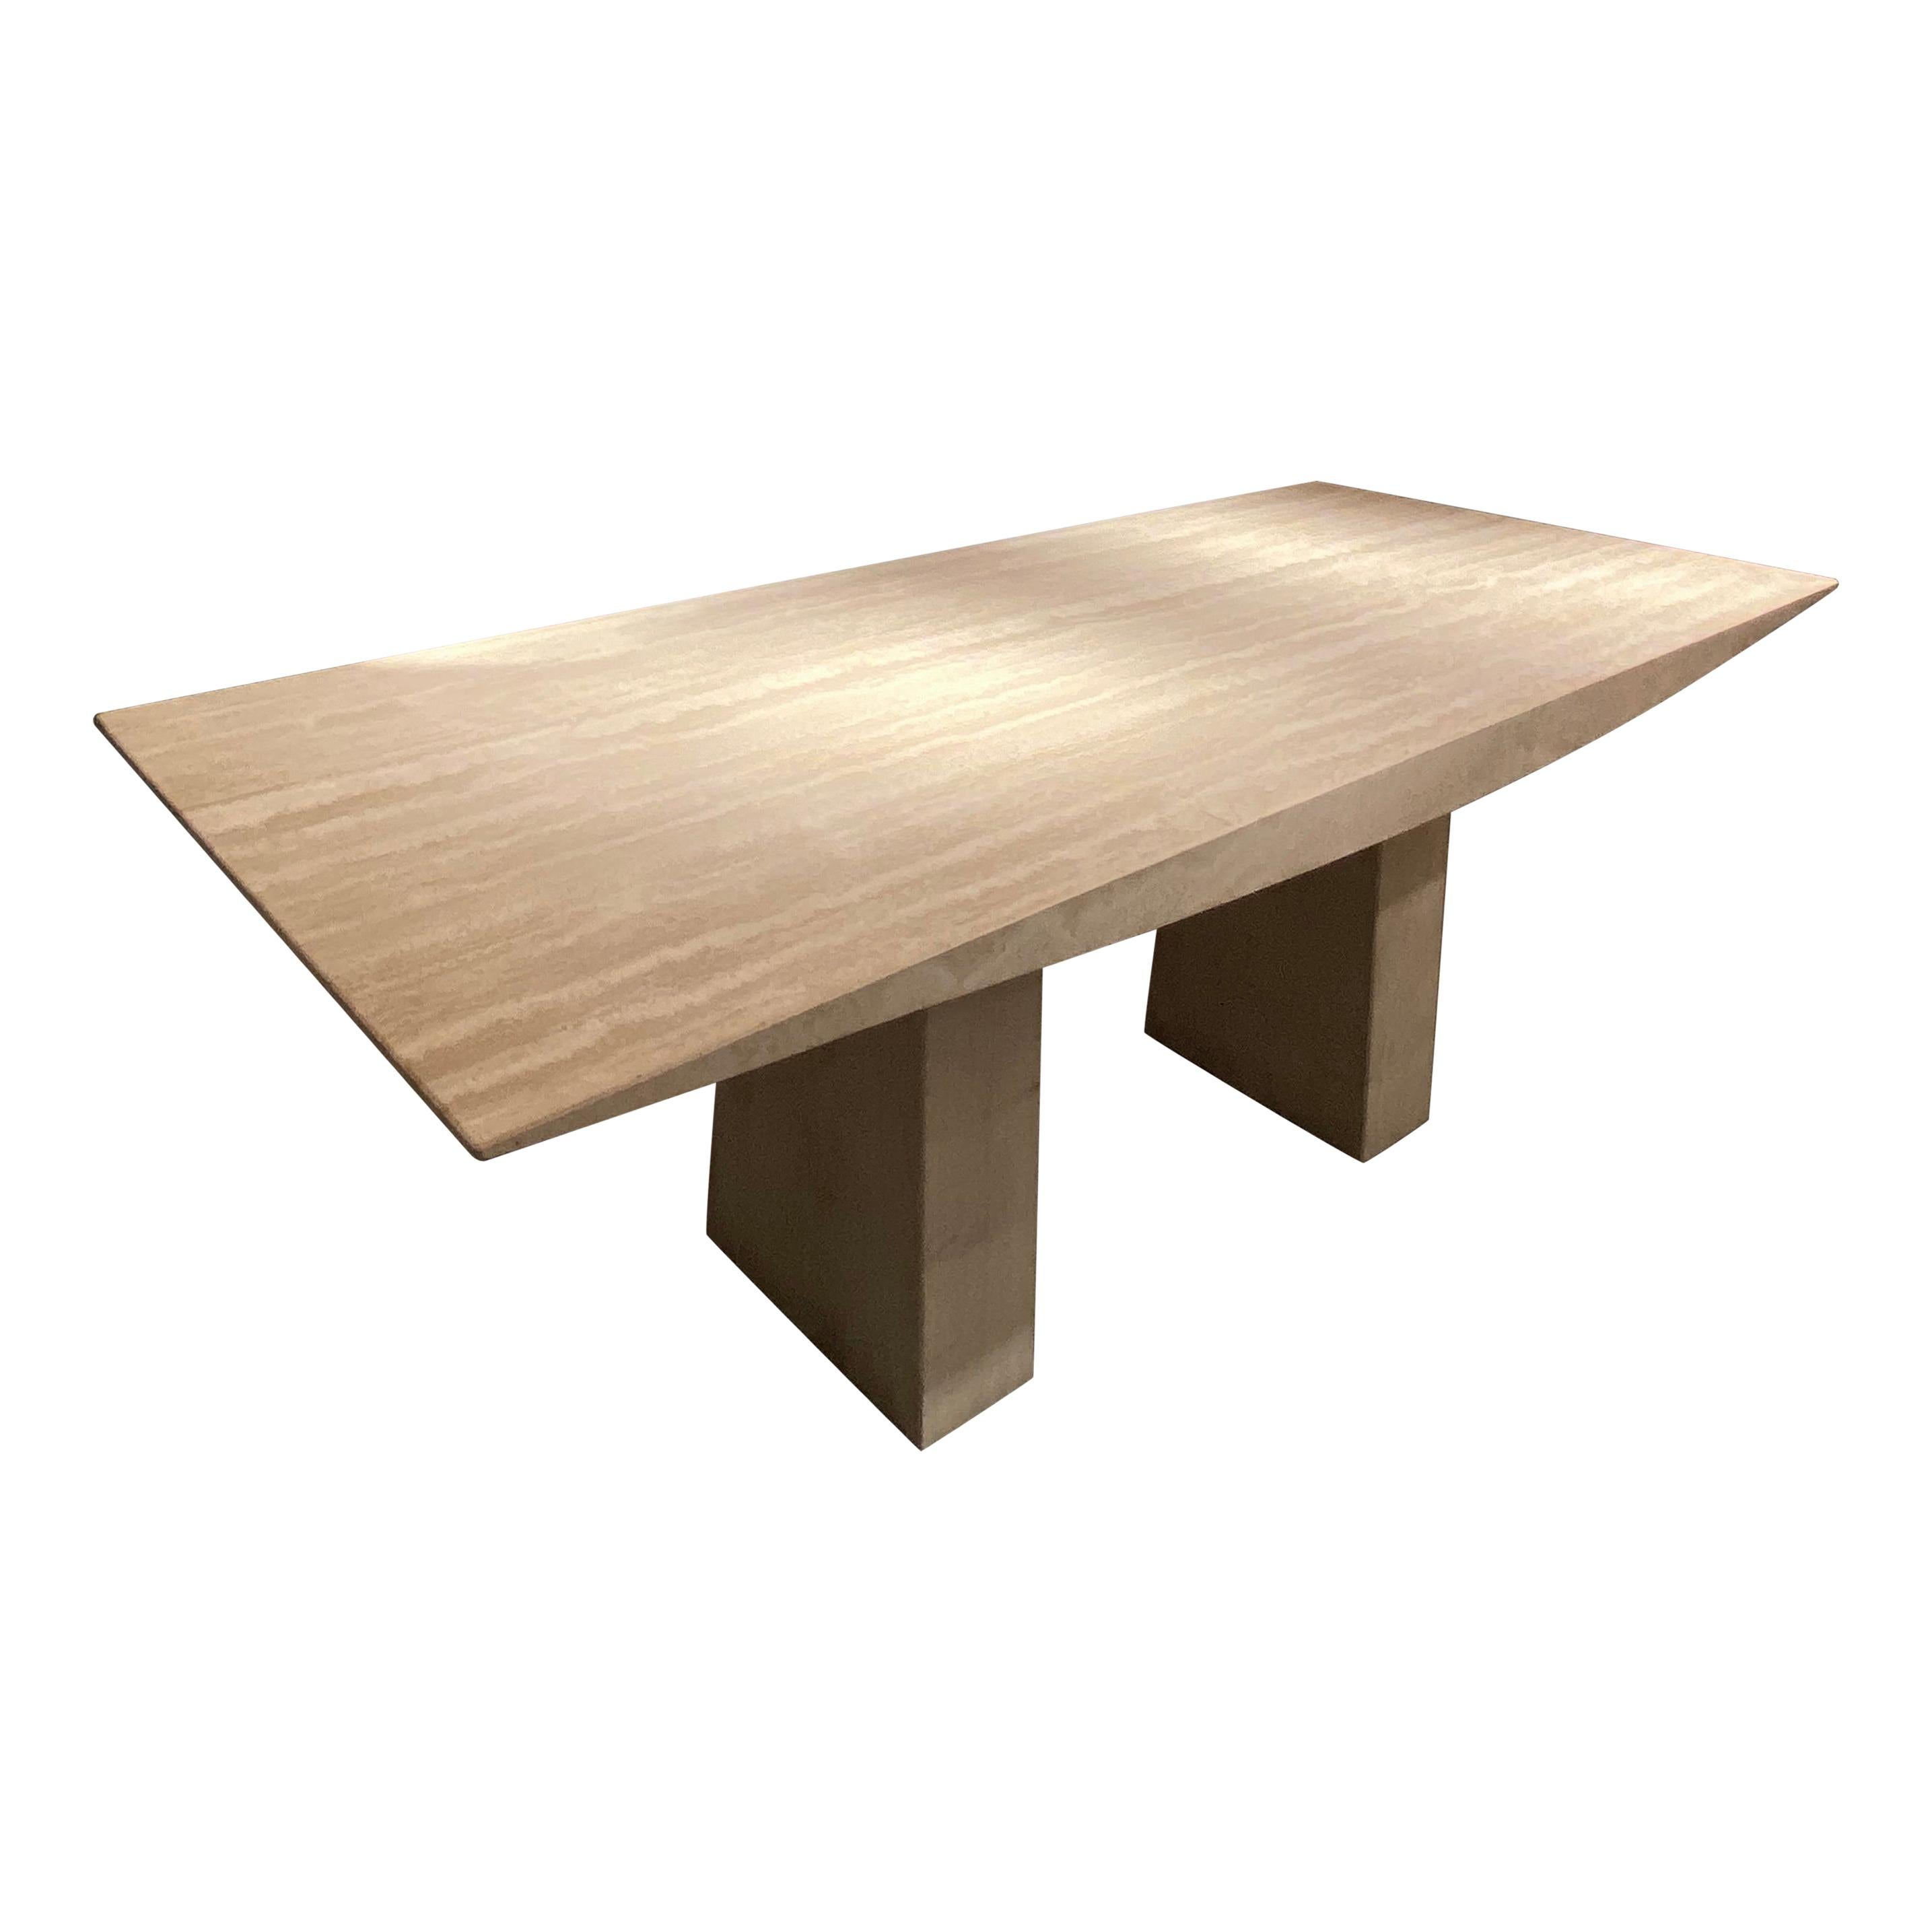 Sculptural Travertine Table For Sale